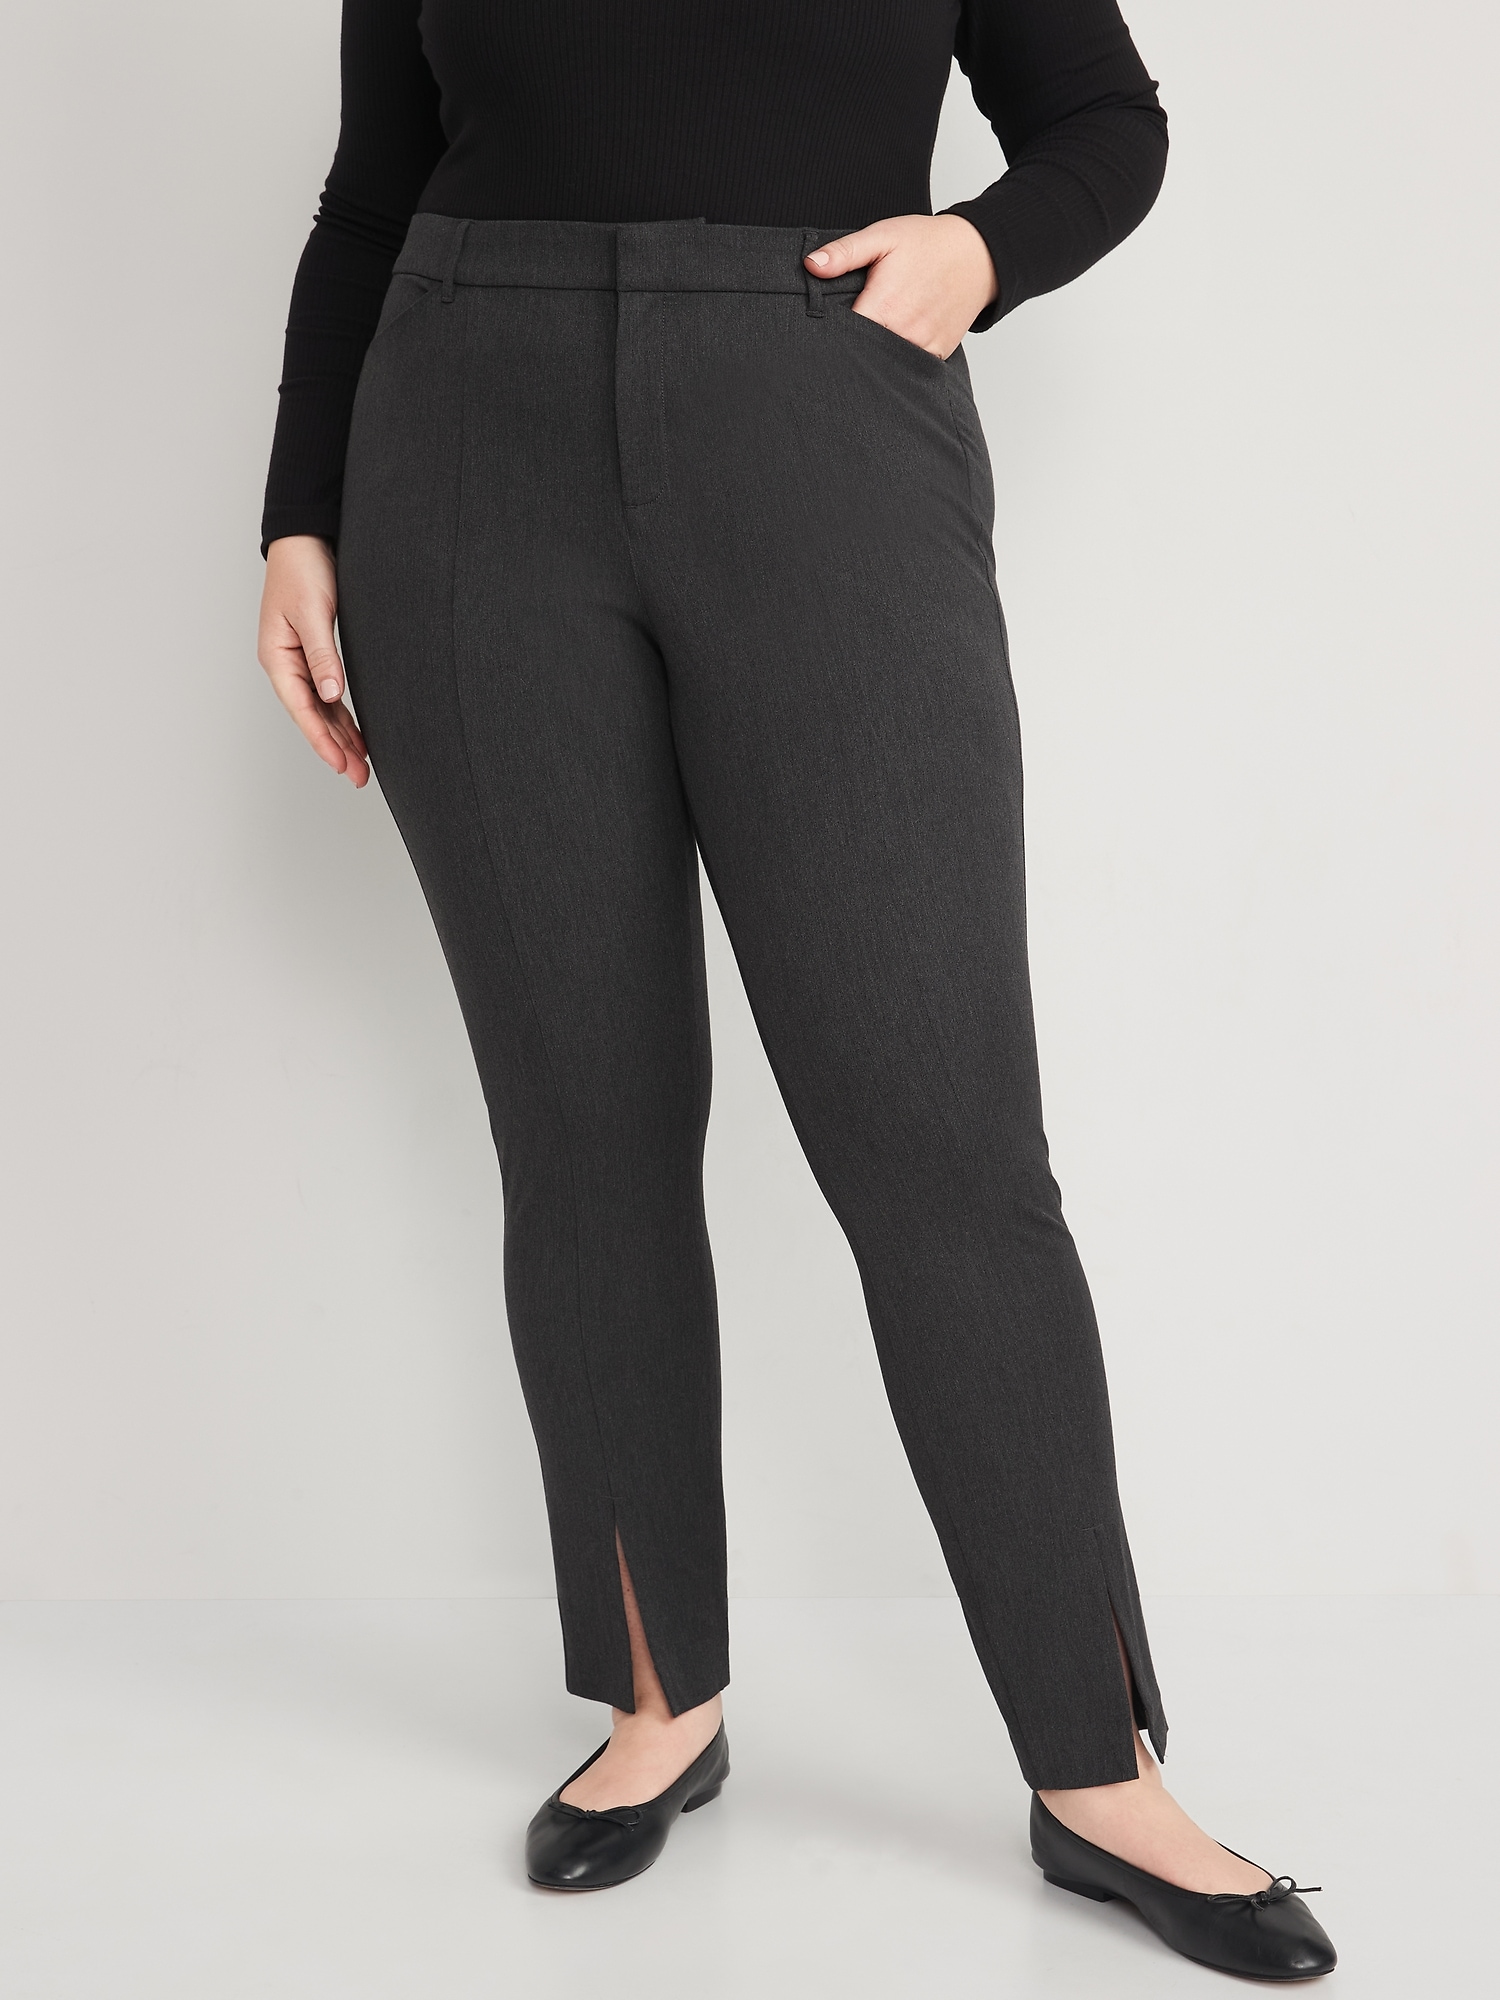 High-Waisted Split-Front Pixie Skinny Pants | Old Navy